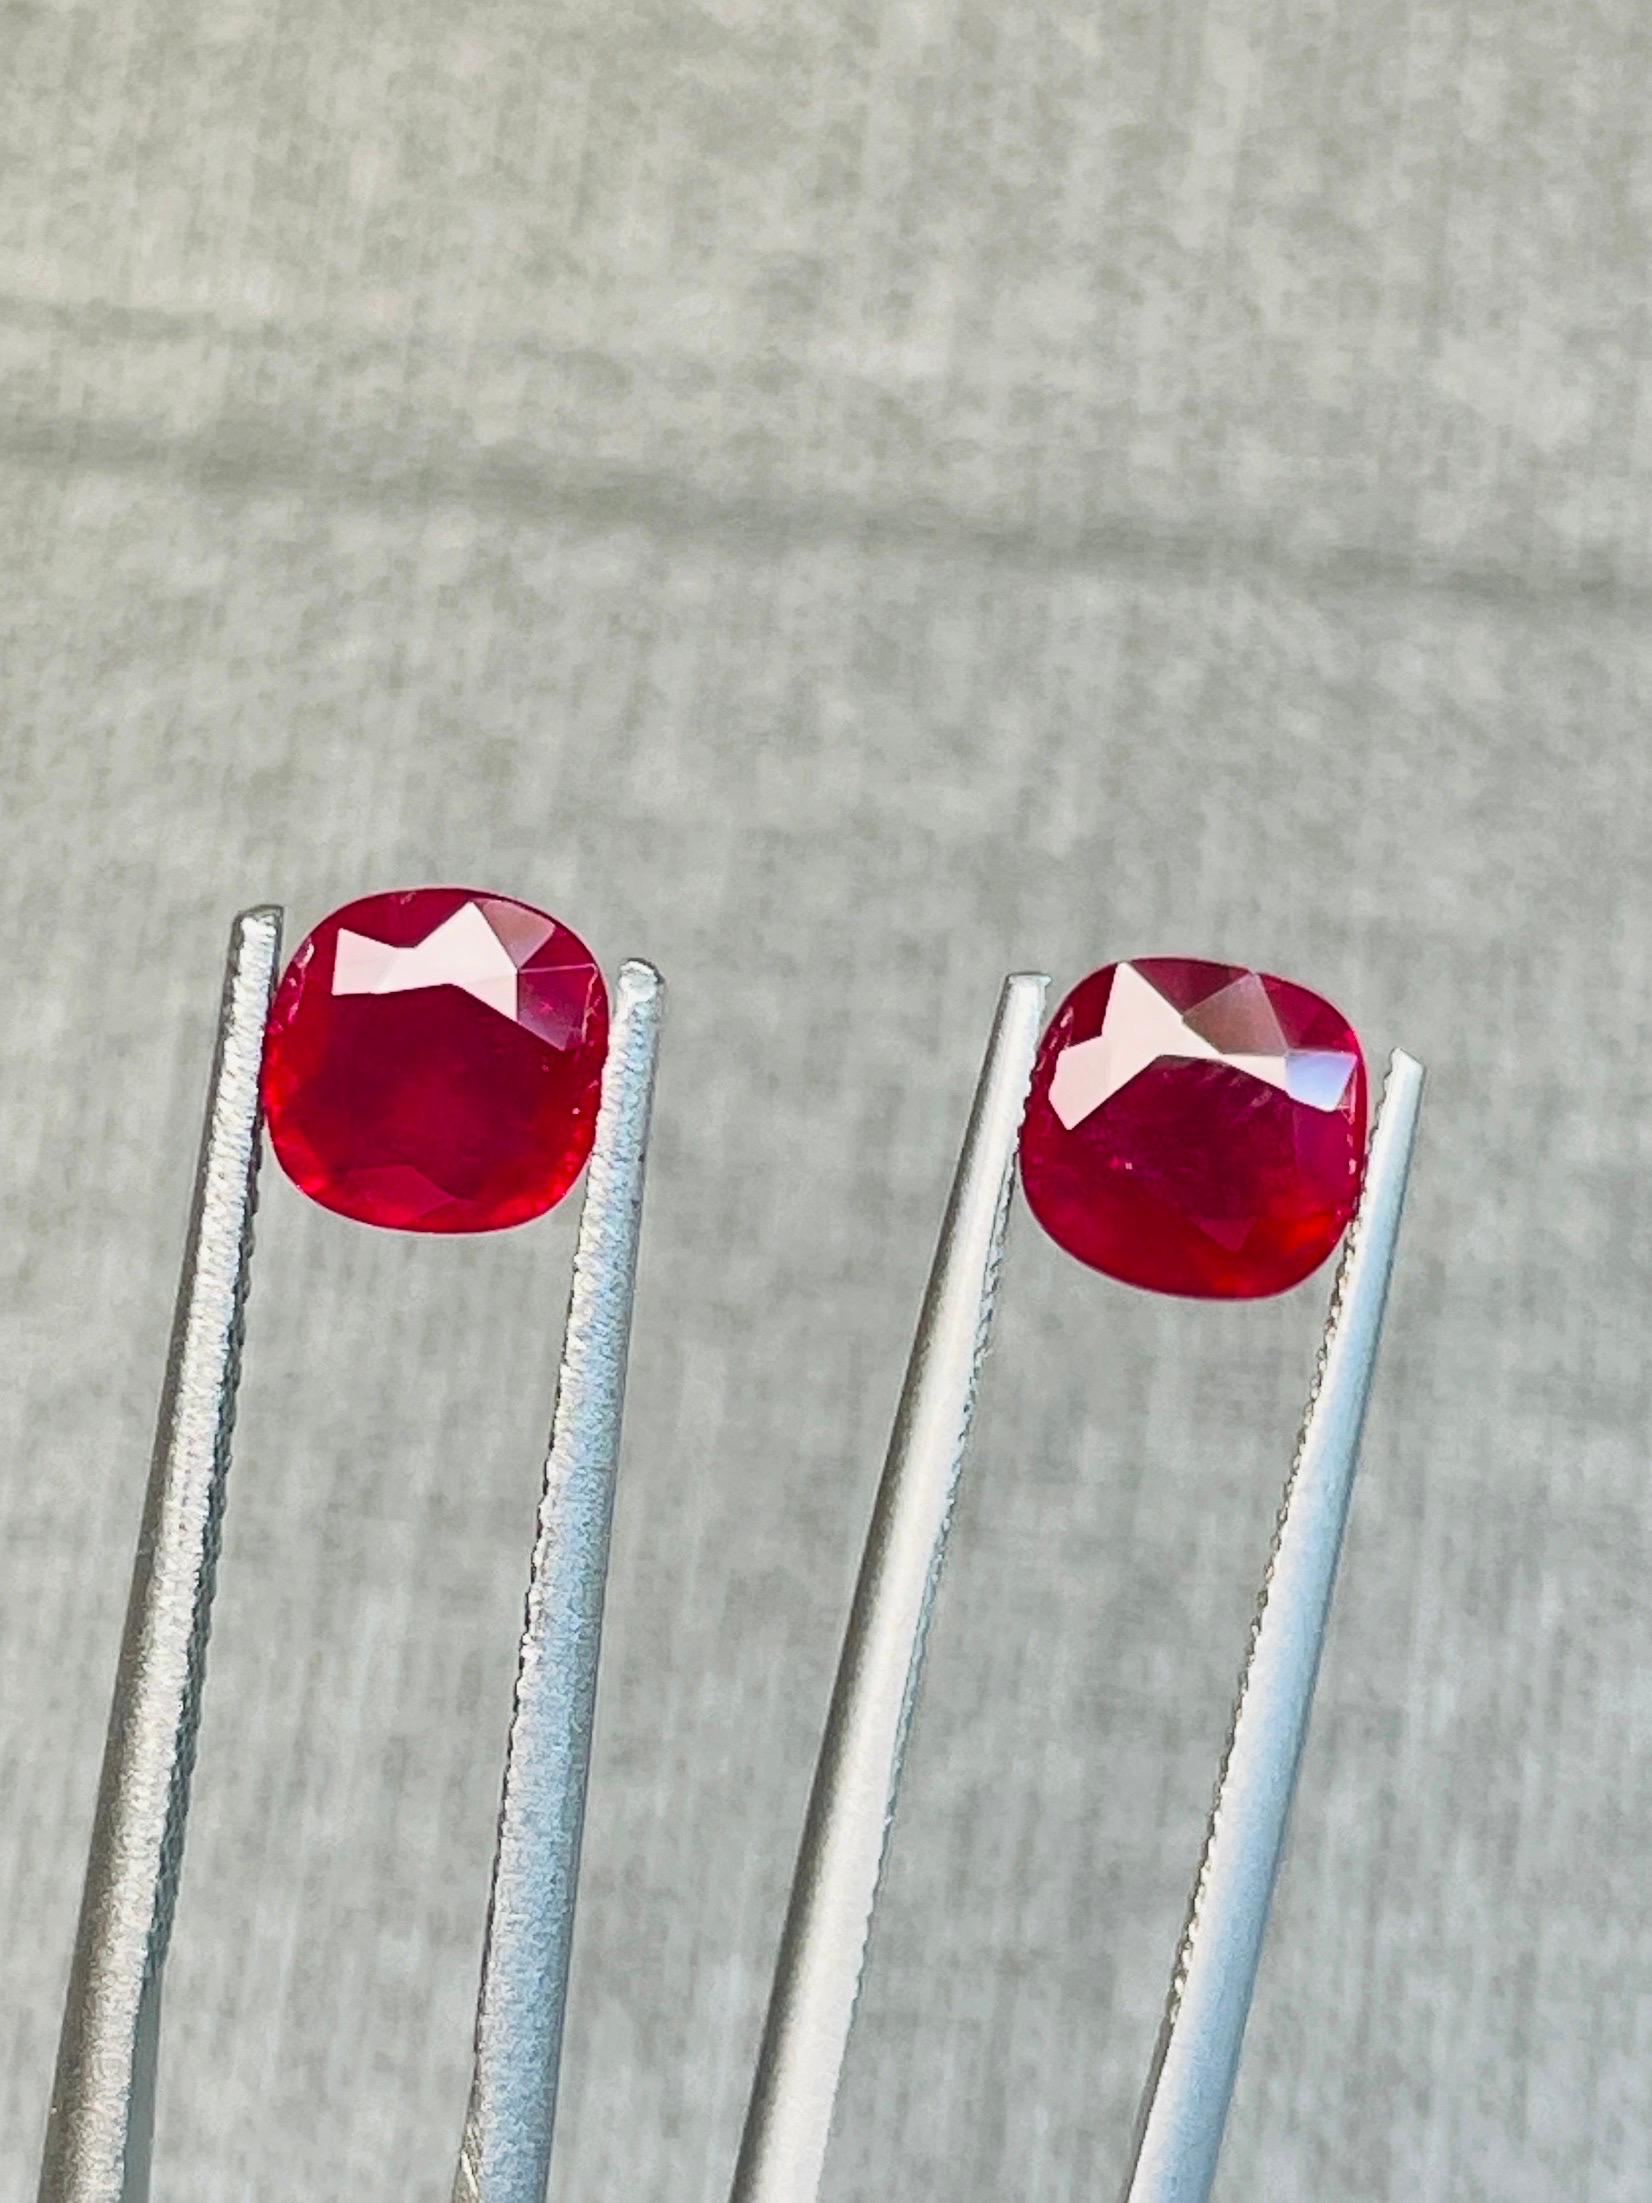 Rare pair 2.06ct burma ruby unheated pigeon blood color GIA AIGS certificate  1